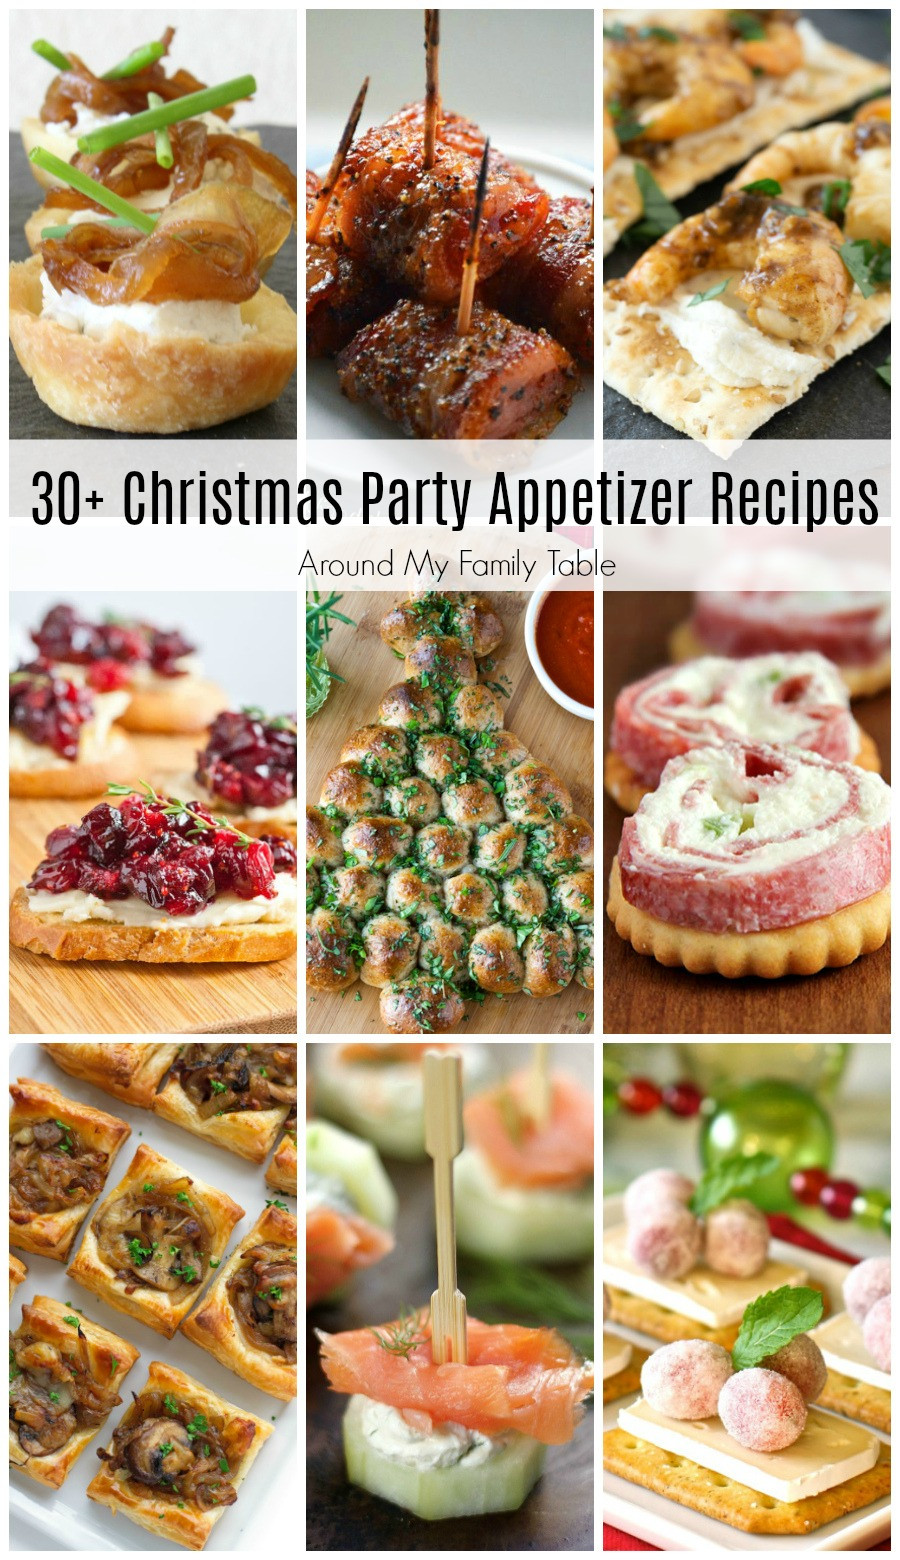 Christmas Themed Appetizers
 Christmas Party Appetizer Recipes Around My Family Table